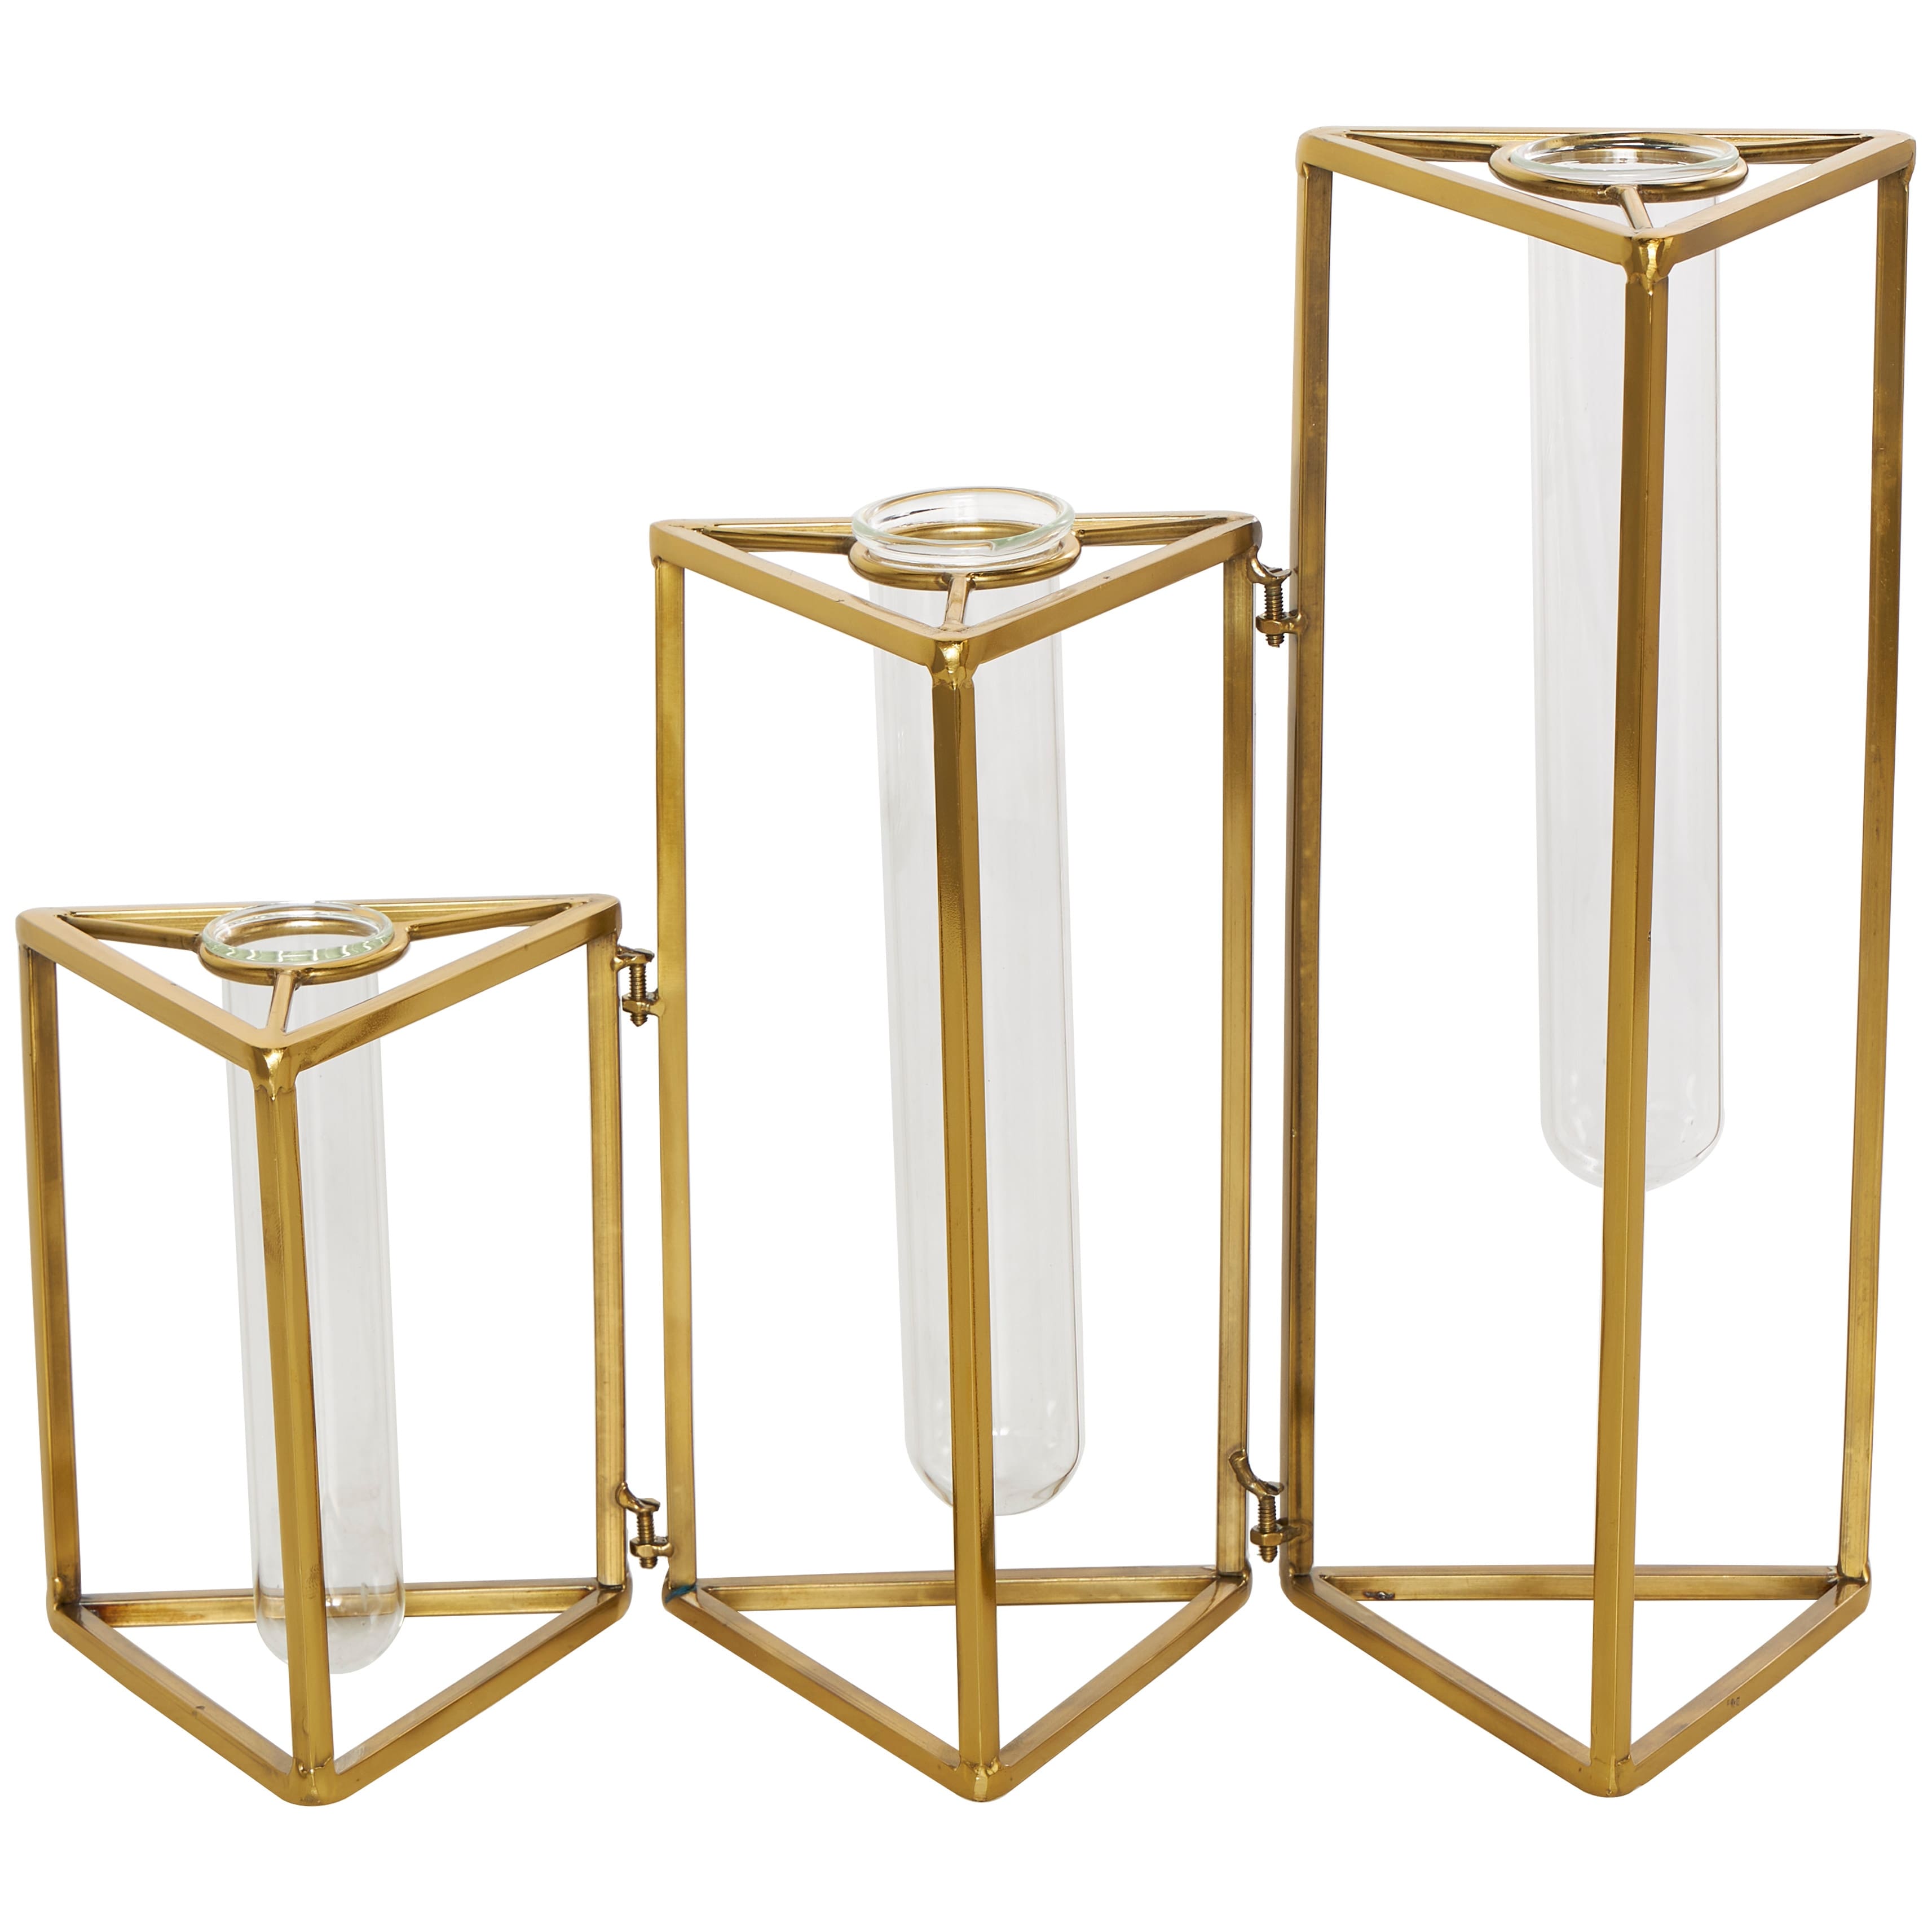 Gold Stainless Steel Foldable Test Tube Bud Vase with Triangular Frames ...